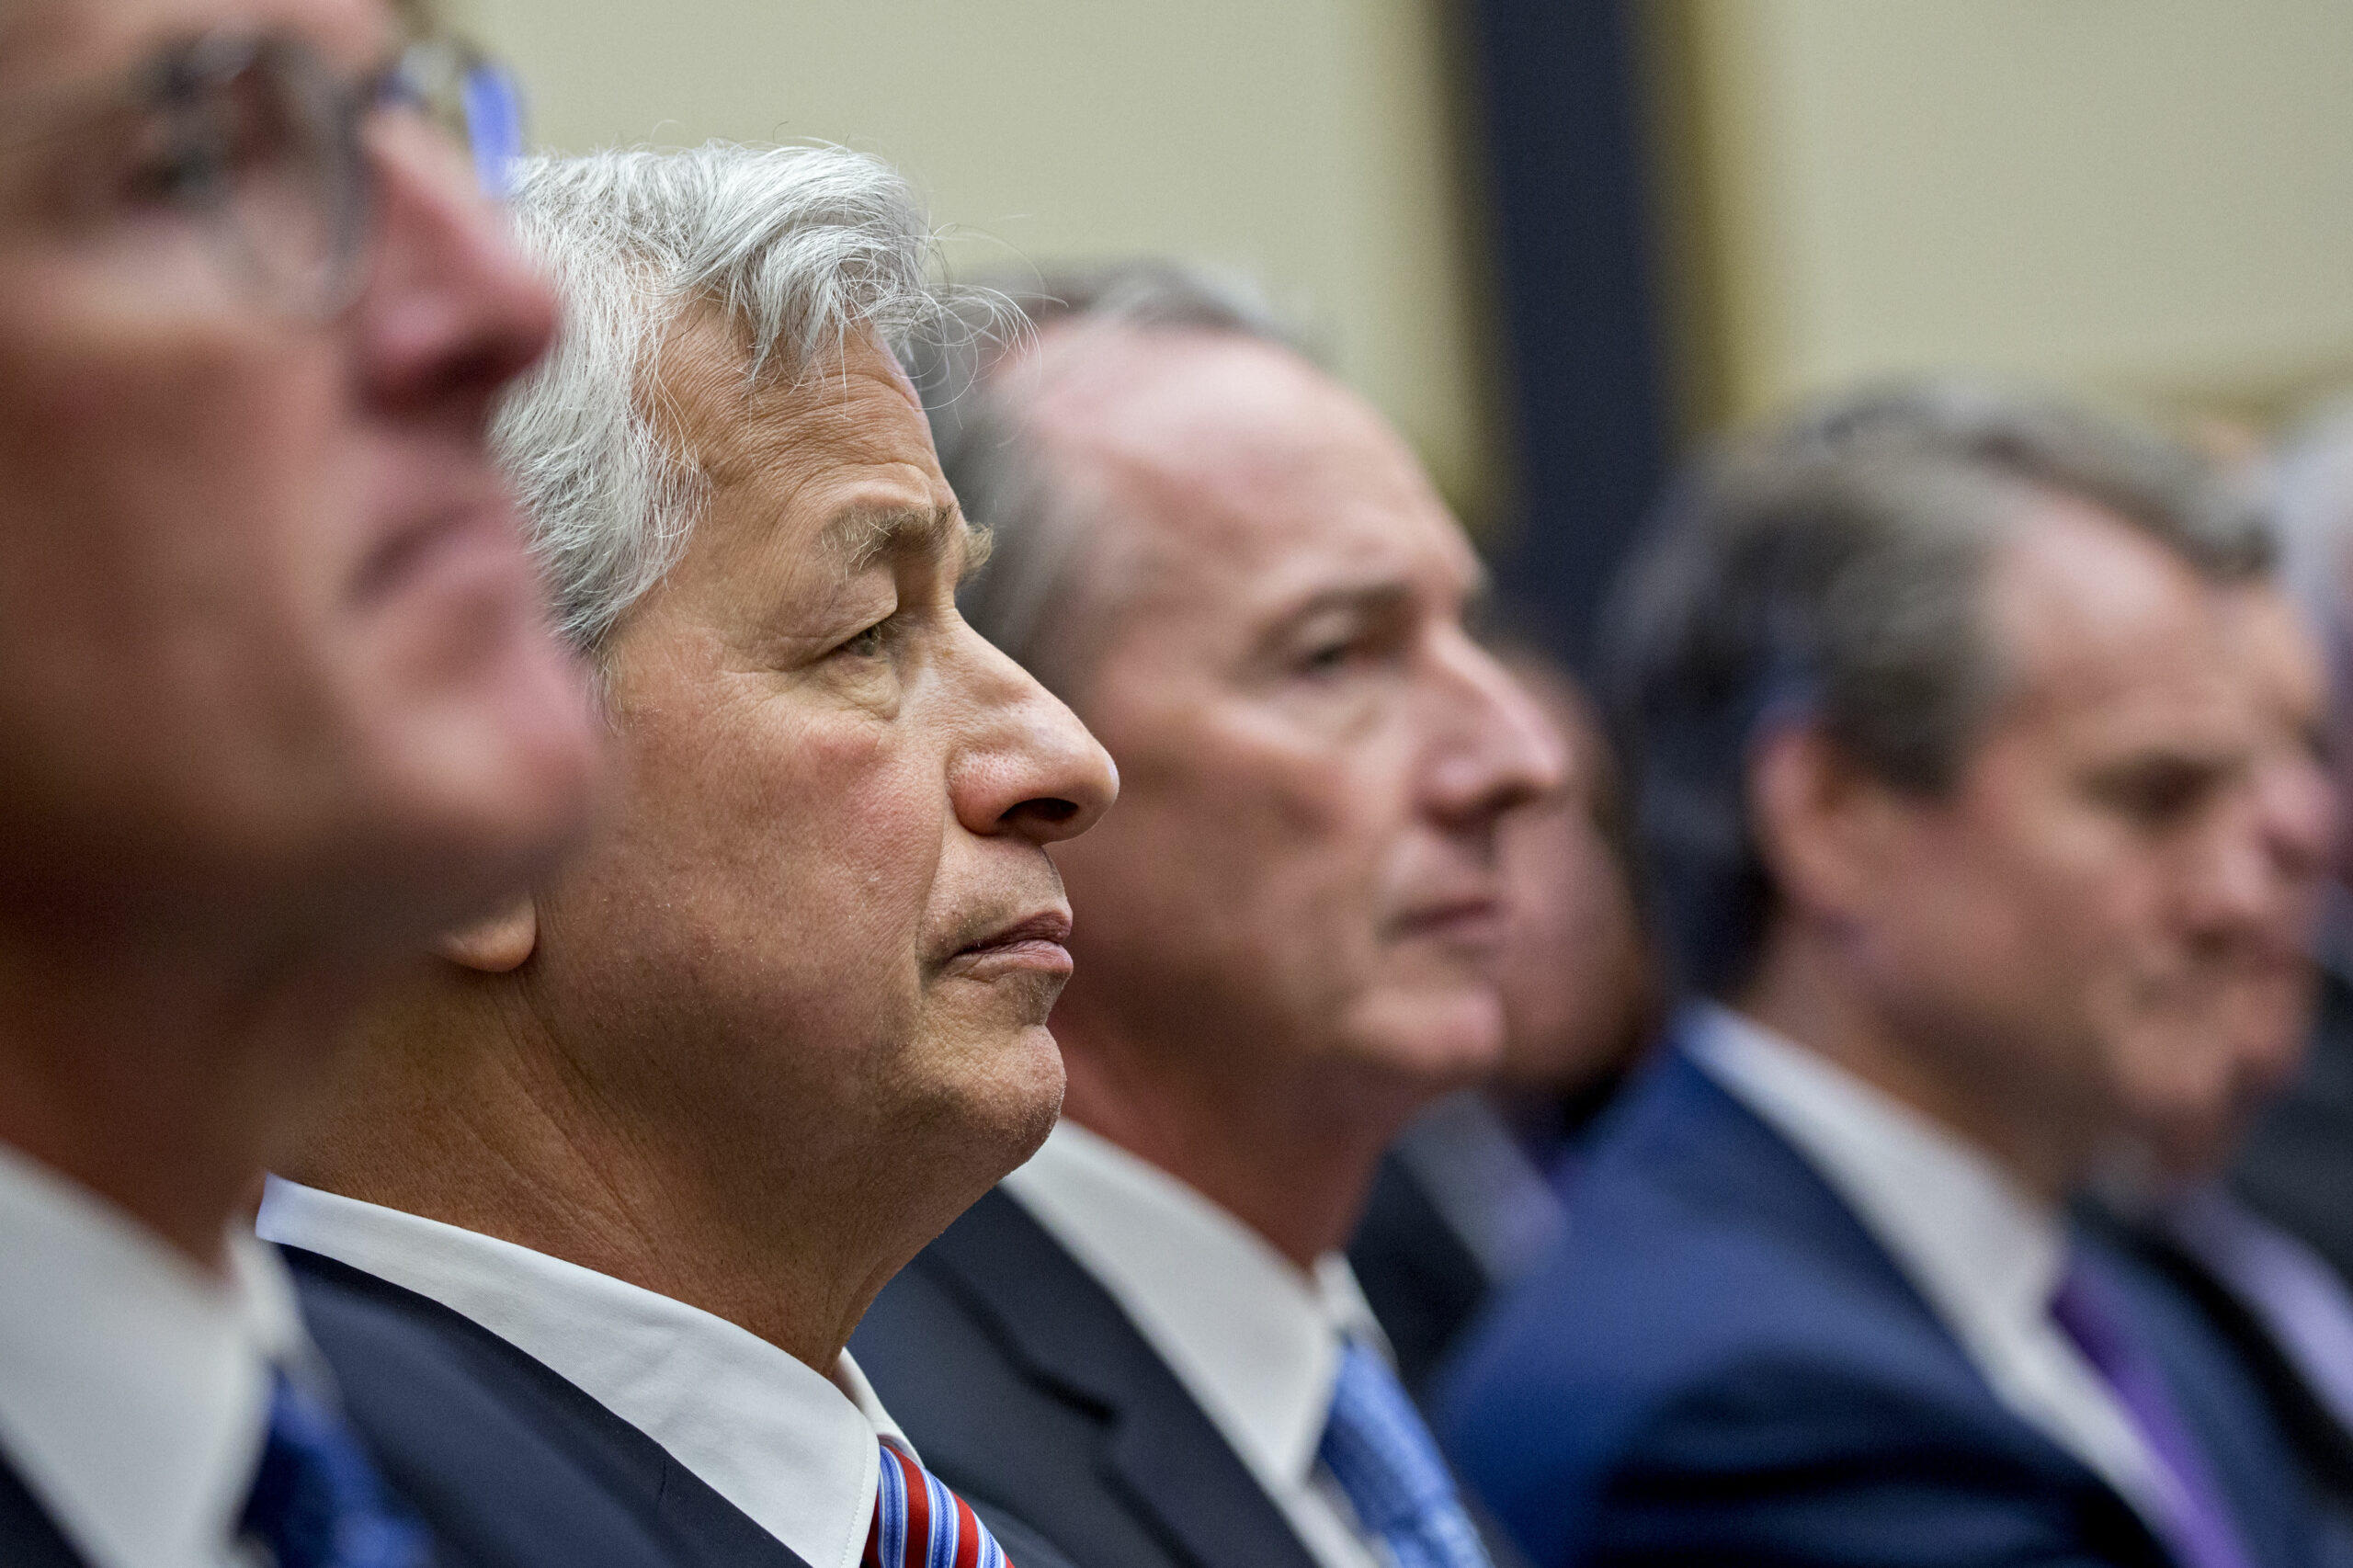 Financial institution CEOs return to Capitol Hill for second day of testimony